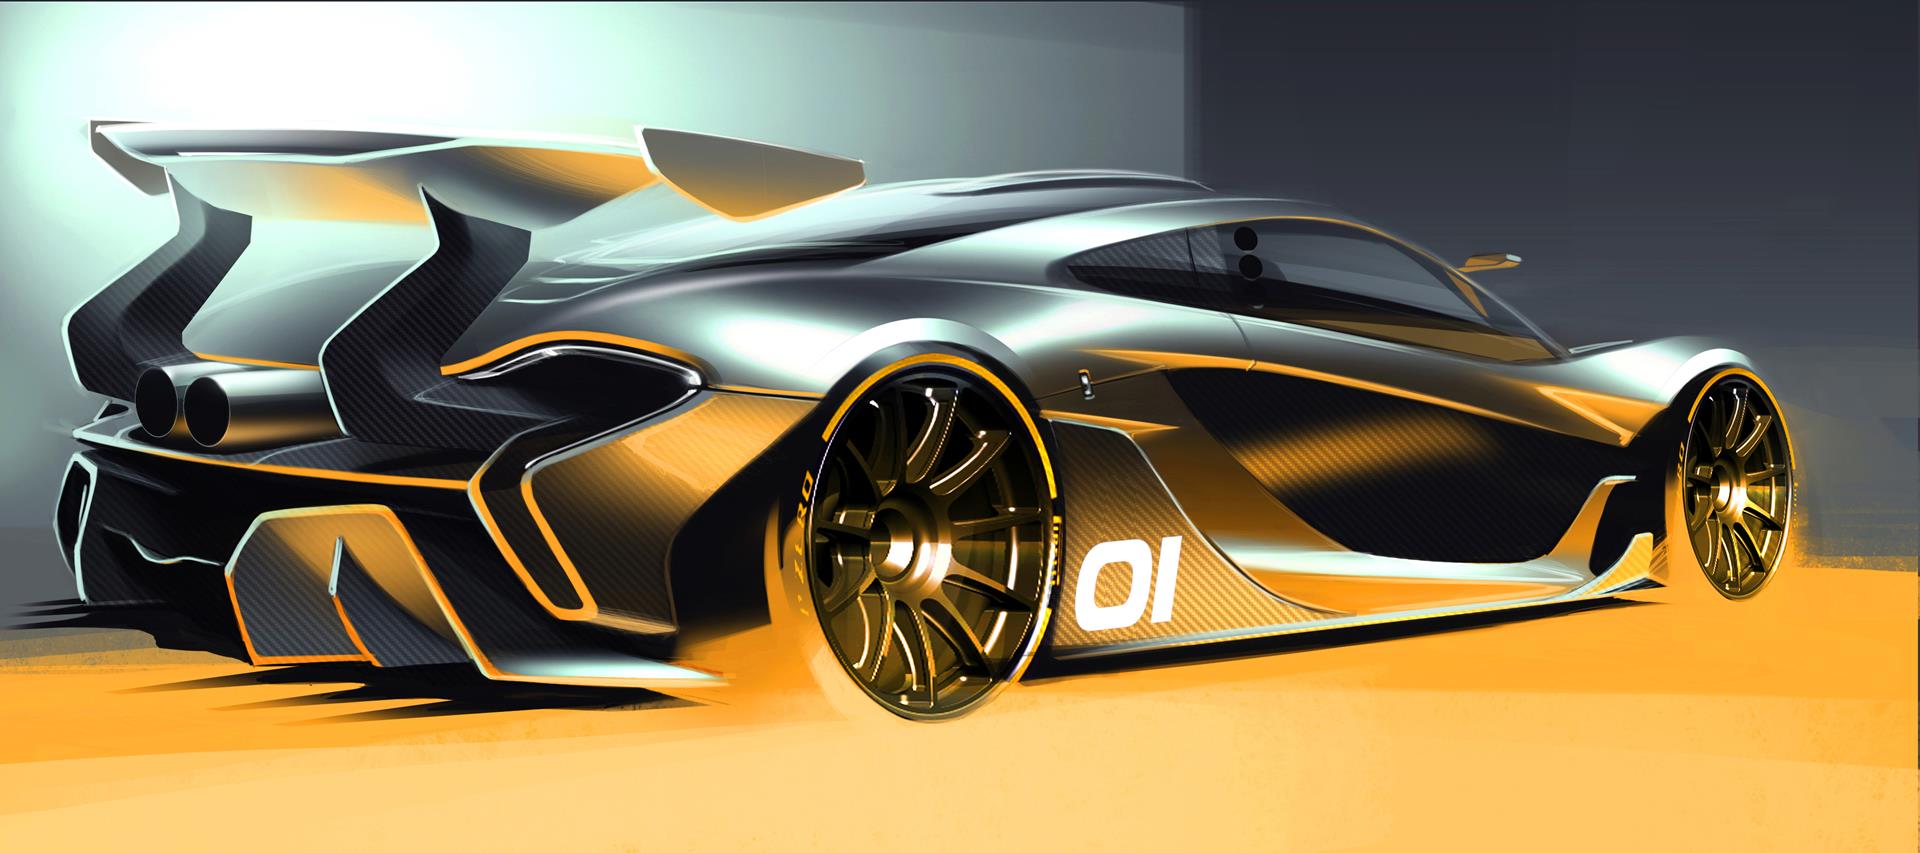 2014 Mclaren P1 Gtr Design Concept News And Information Research And Pricing